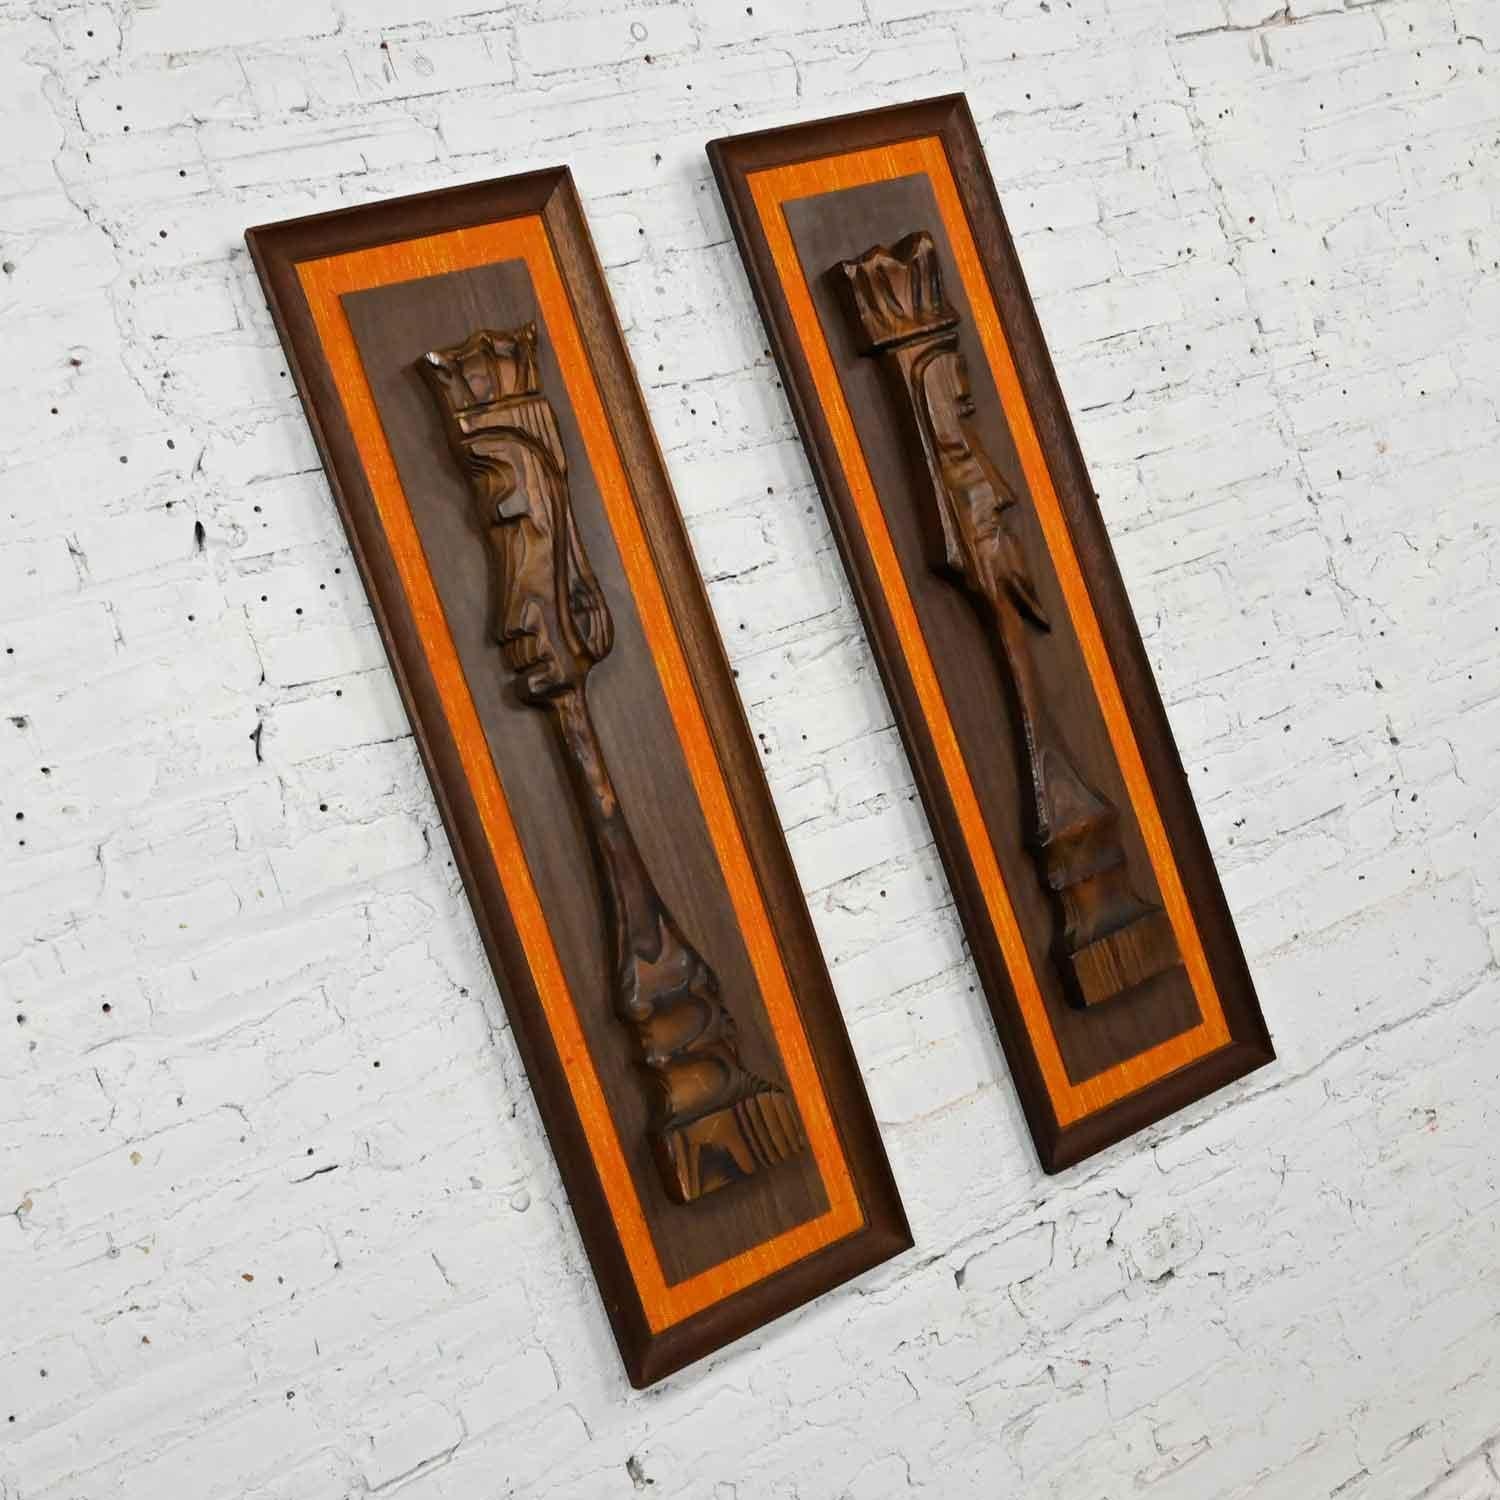 American Witco Tiki Island Style King & Queen Chess Pair Carved Wall Hanging Sculptures